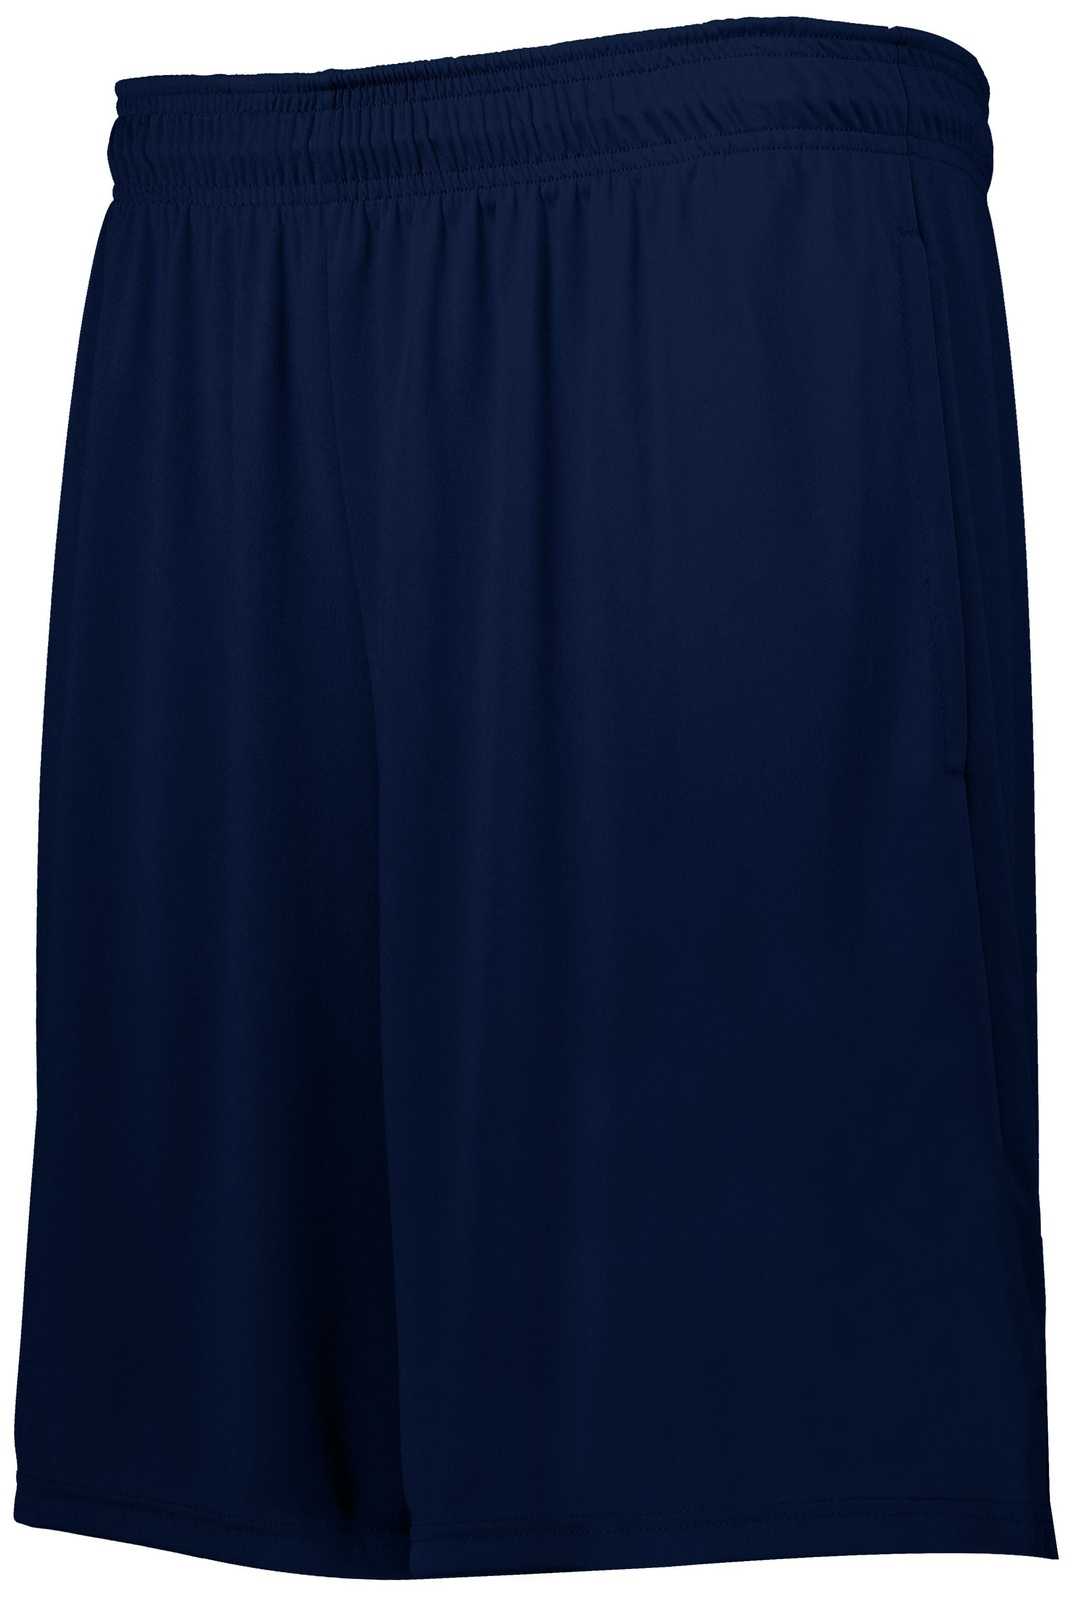 Holloway 229511 Whisk 2.0 Shorts - Navy - HIT a Double